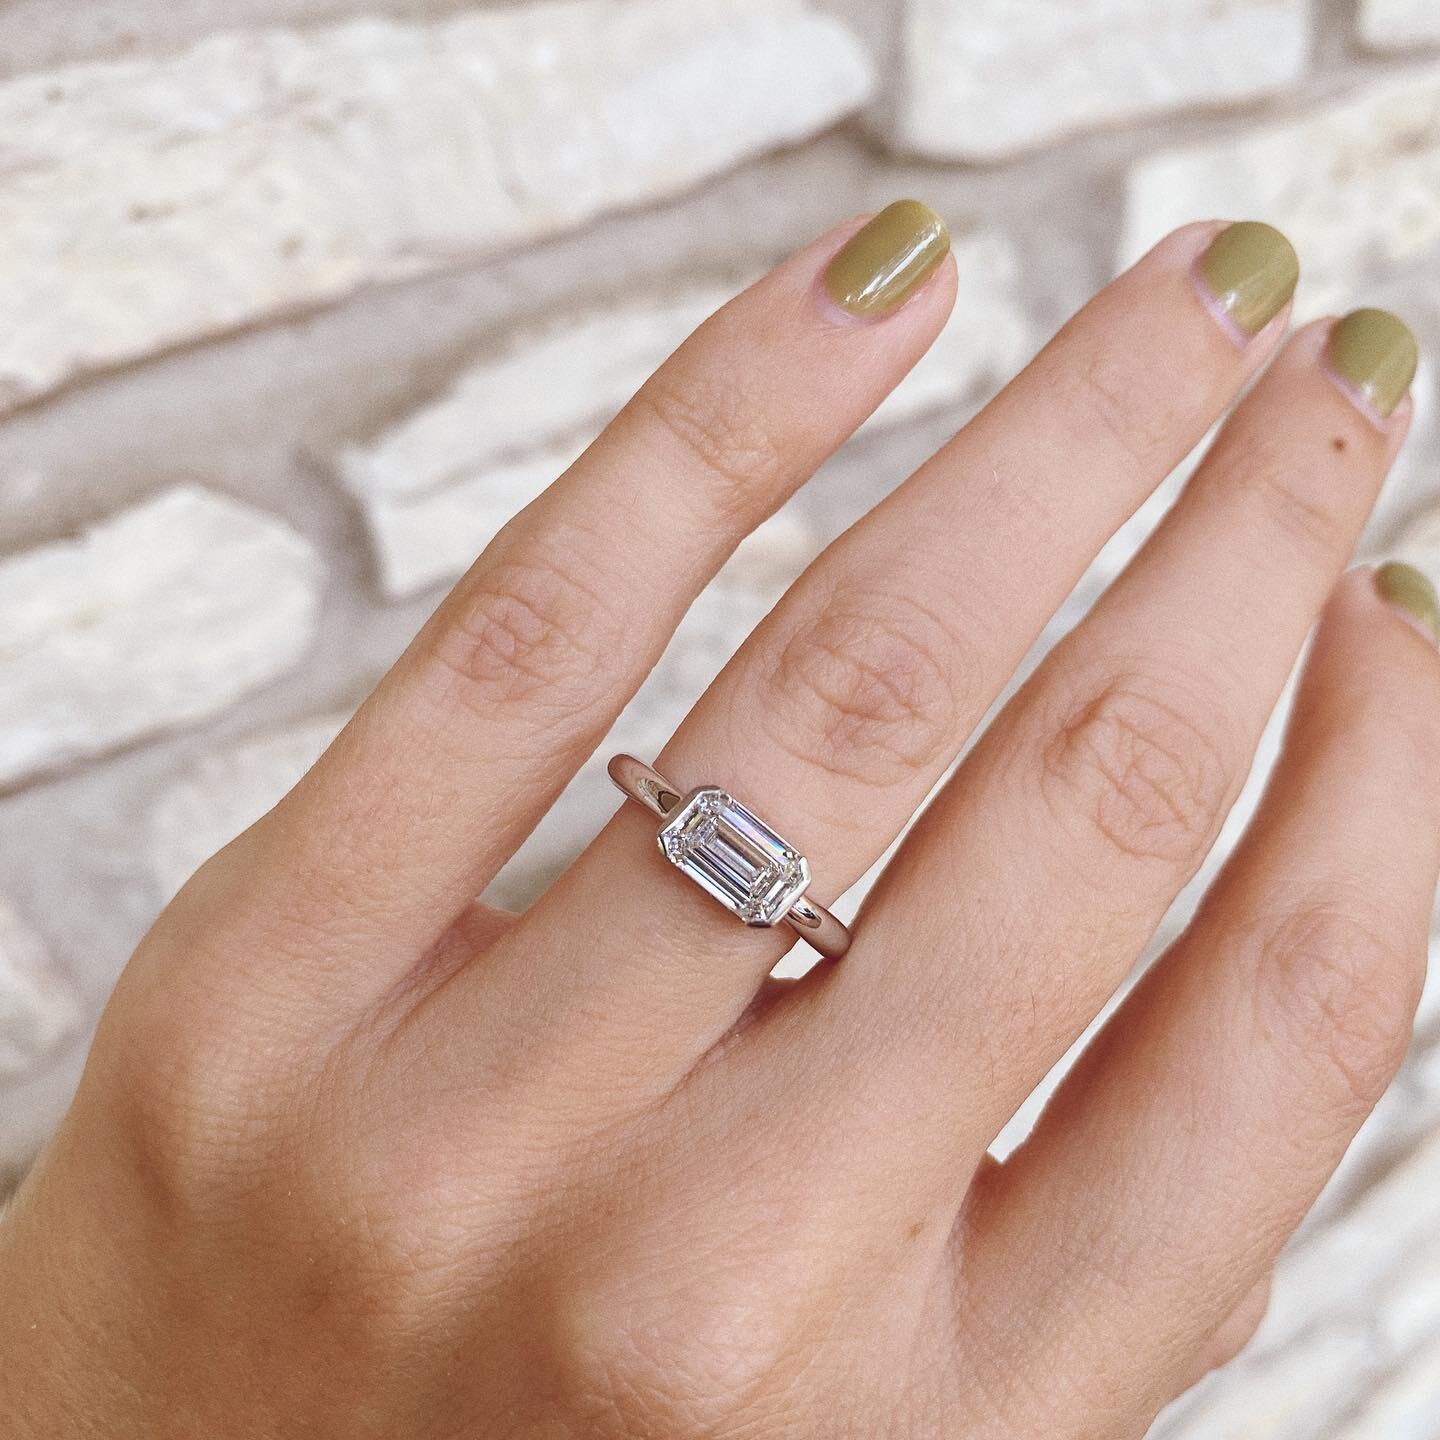 A simple simple redesign can make all the difference 😌 our client&rsquo;s emerald cut living her best life in a new @hine.nyc setting 😇 is it just me or do diamonds look bigger when set east/west?!